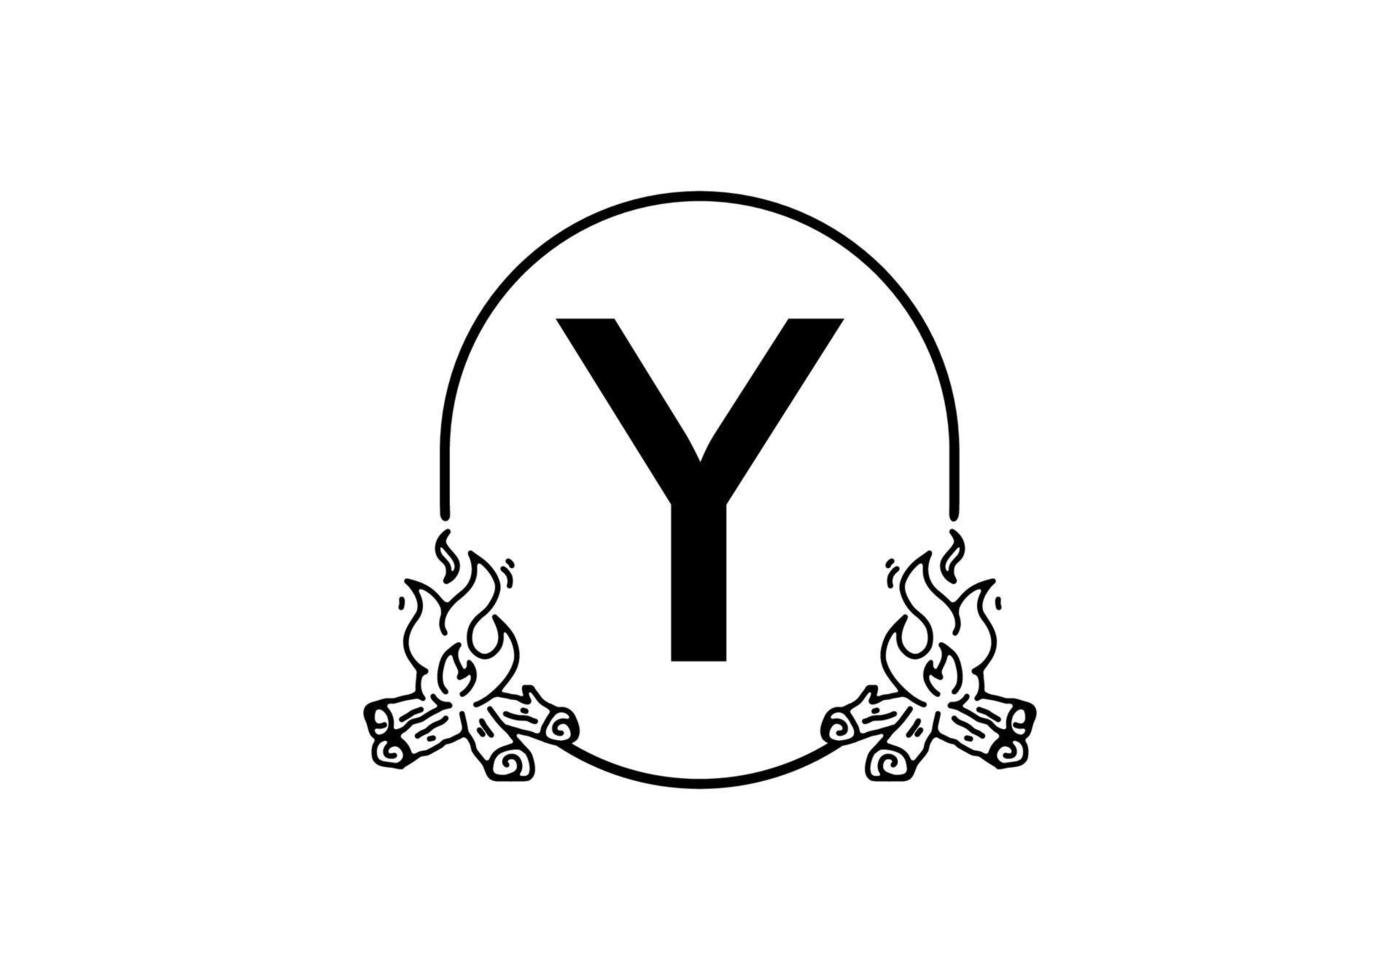 Black line art of bonfire with Y initial letter vector